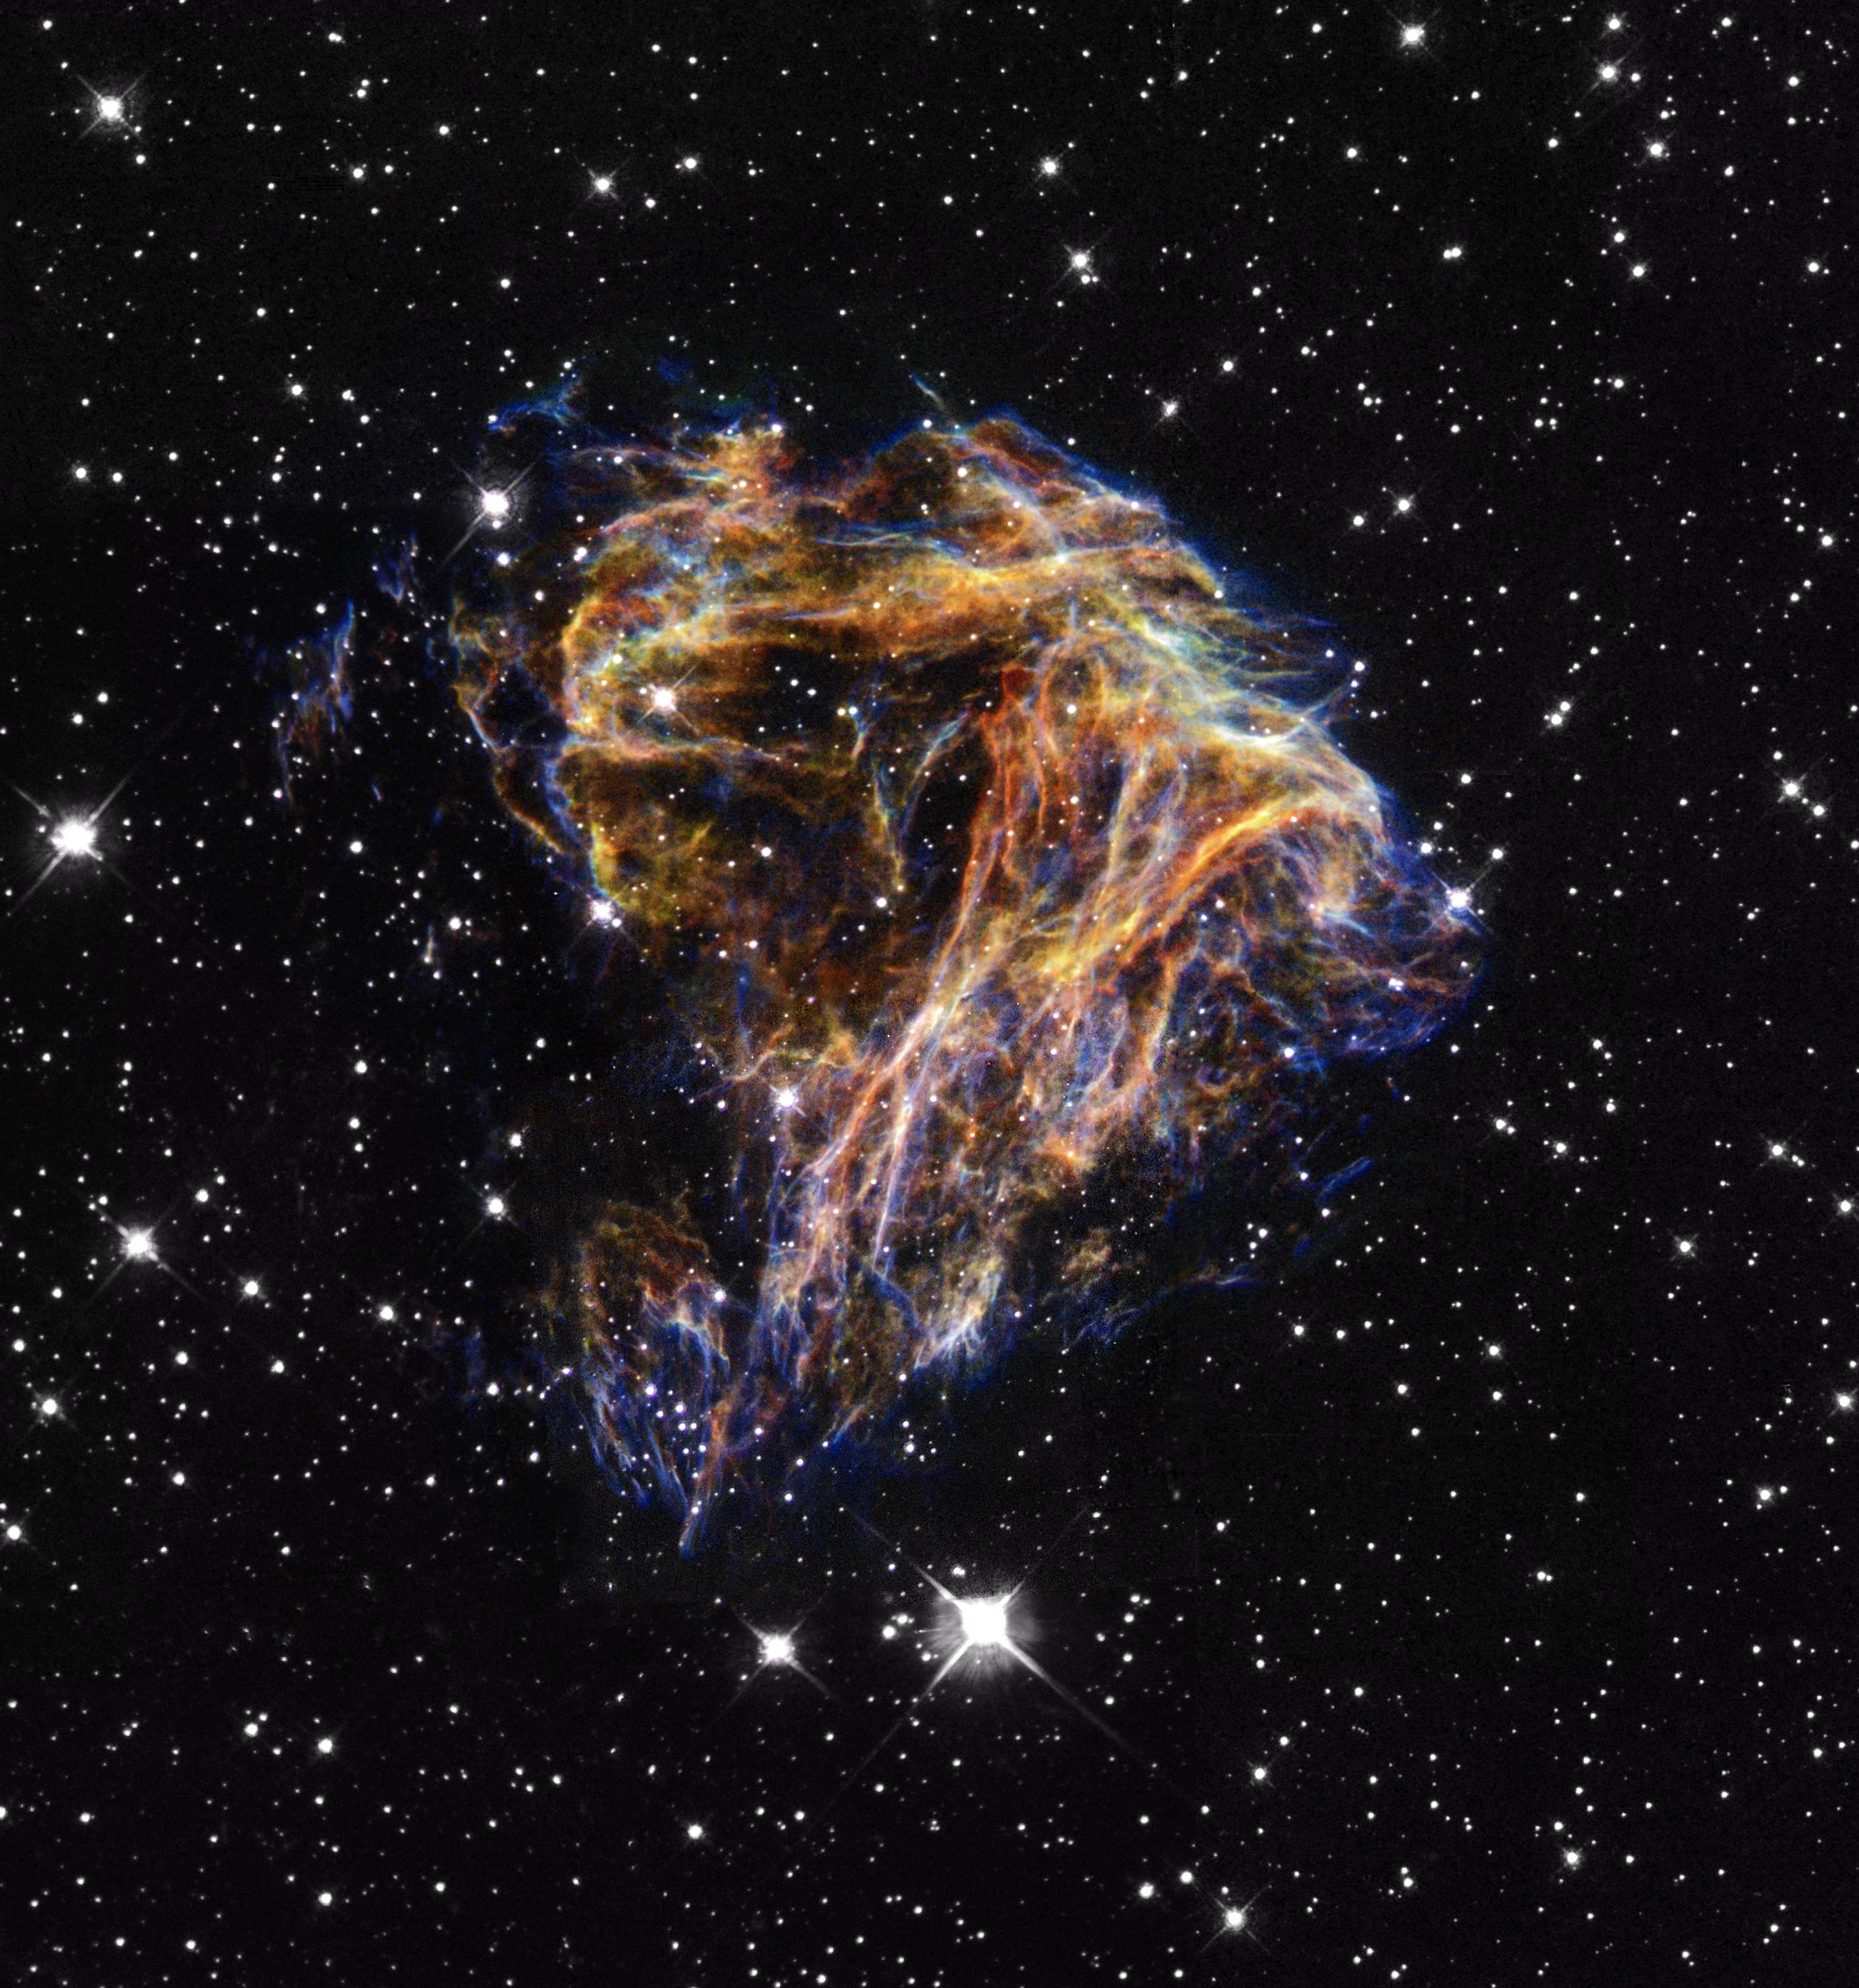 Many points of light are scattered across the black background of space like confetti. At center are blue and orange strands, debris from a star explosion.